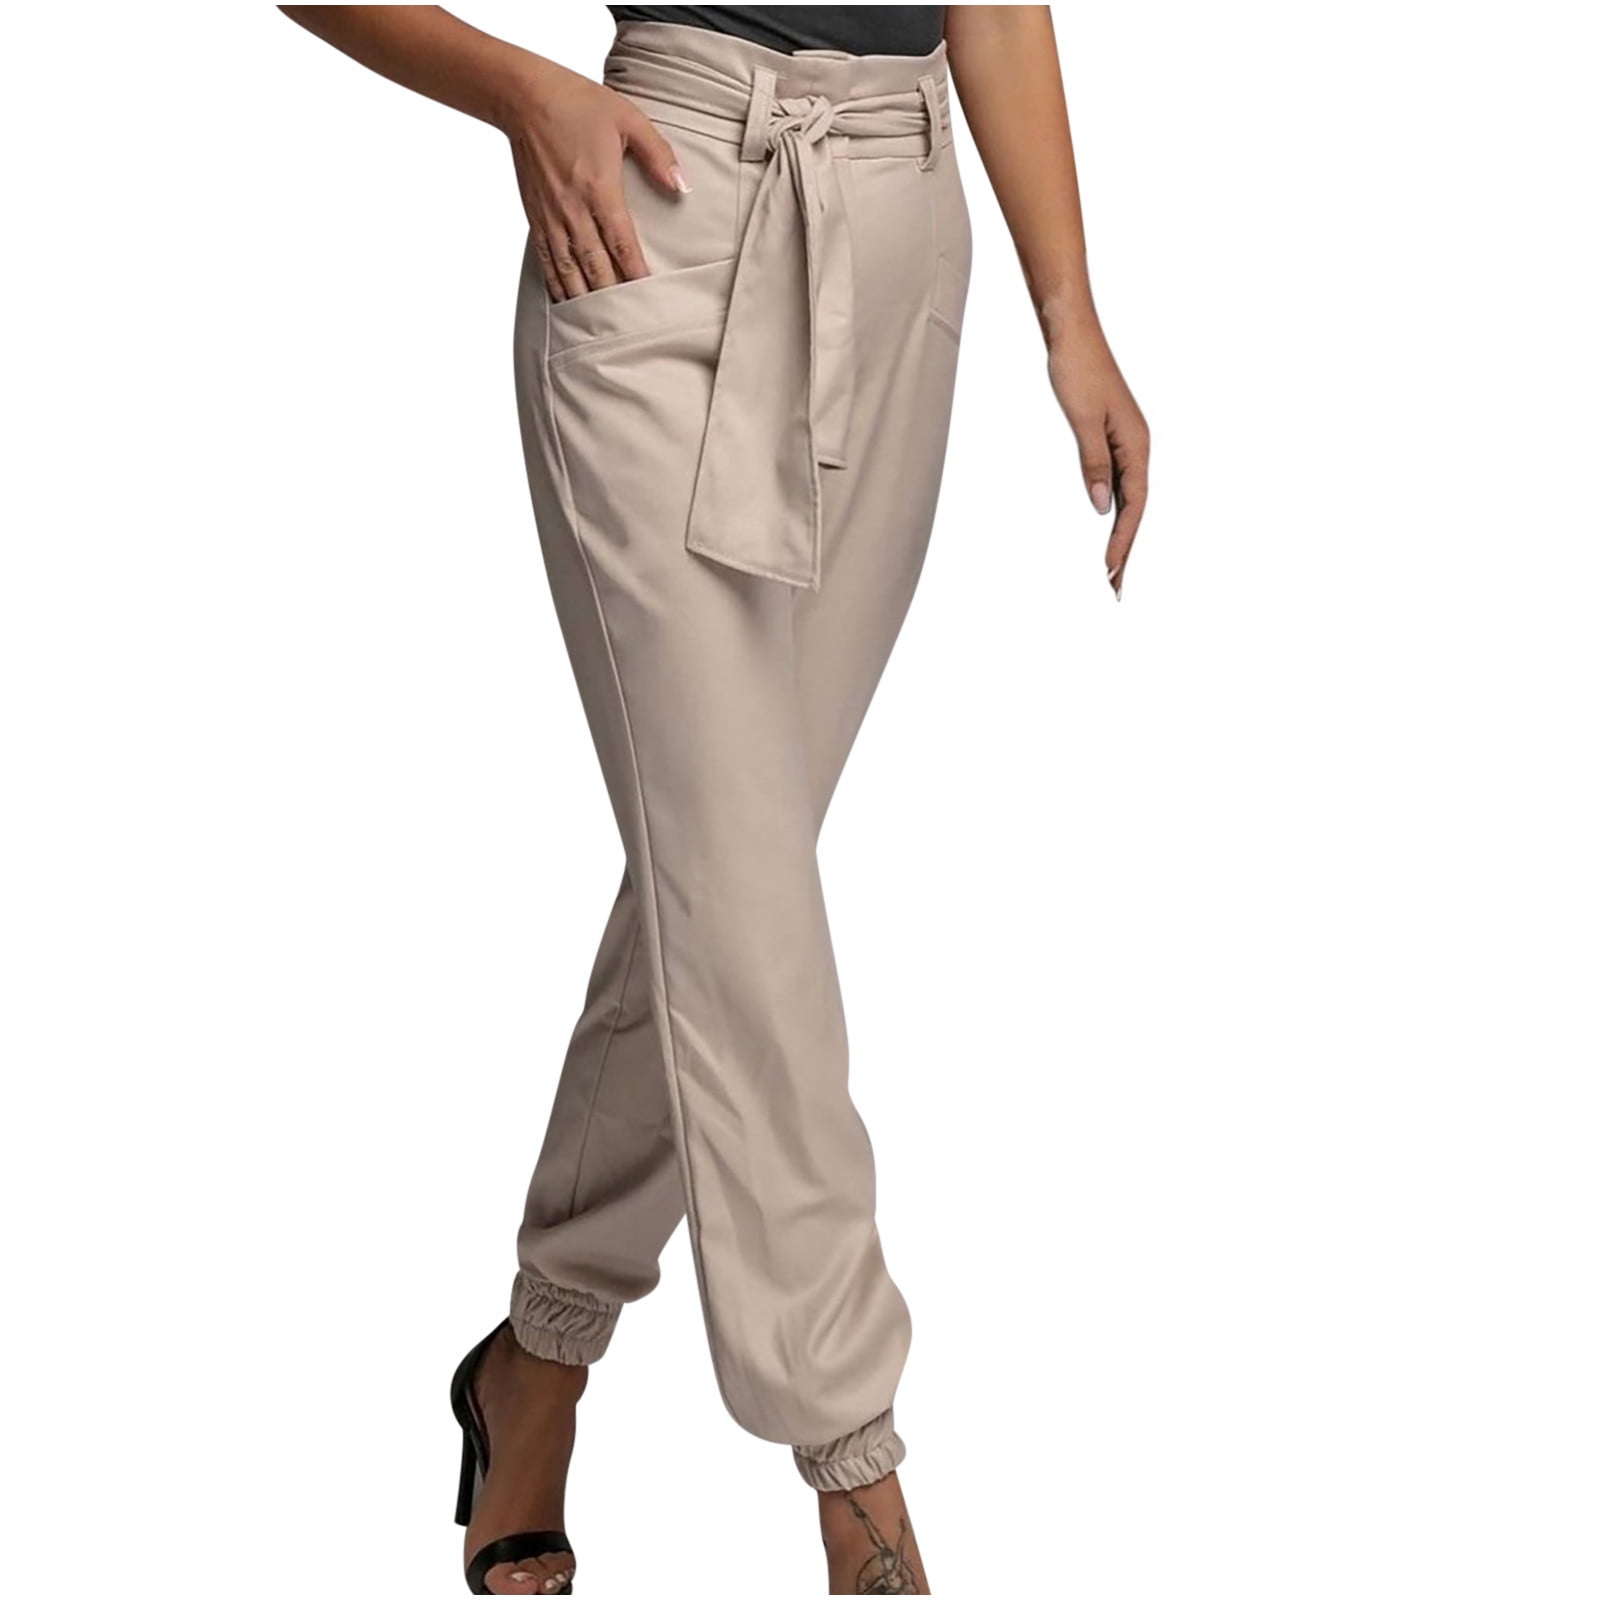 Women's High Waist Dress Pants with Belt Pockets Athleisure Pants Cinched  Ankle Length Soft Satin Joggers